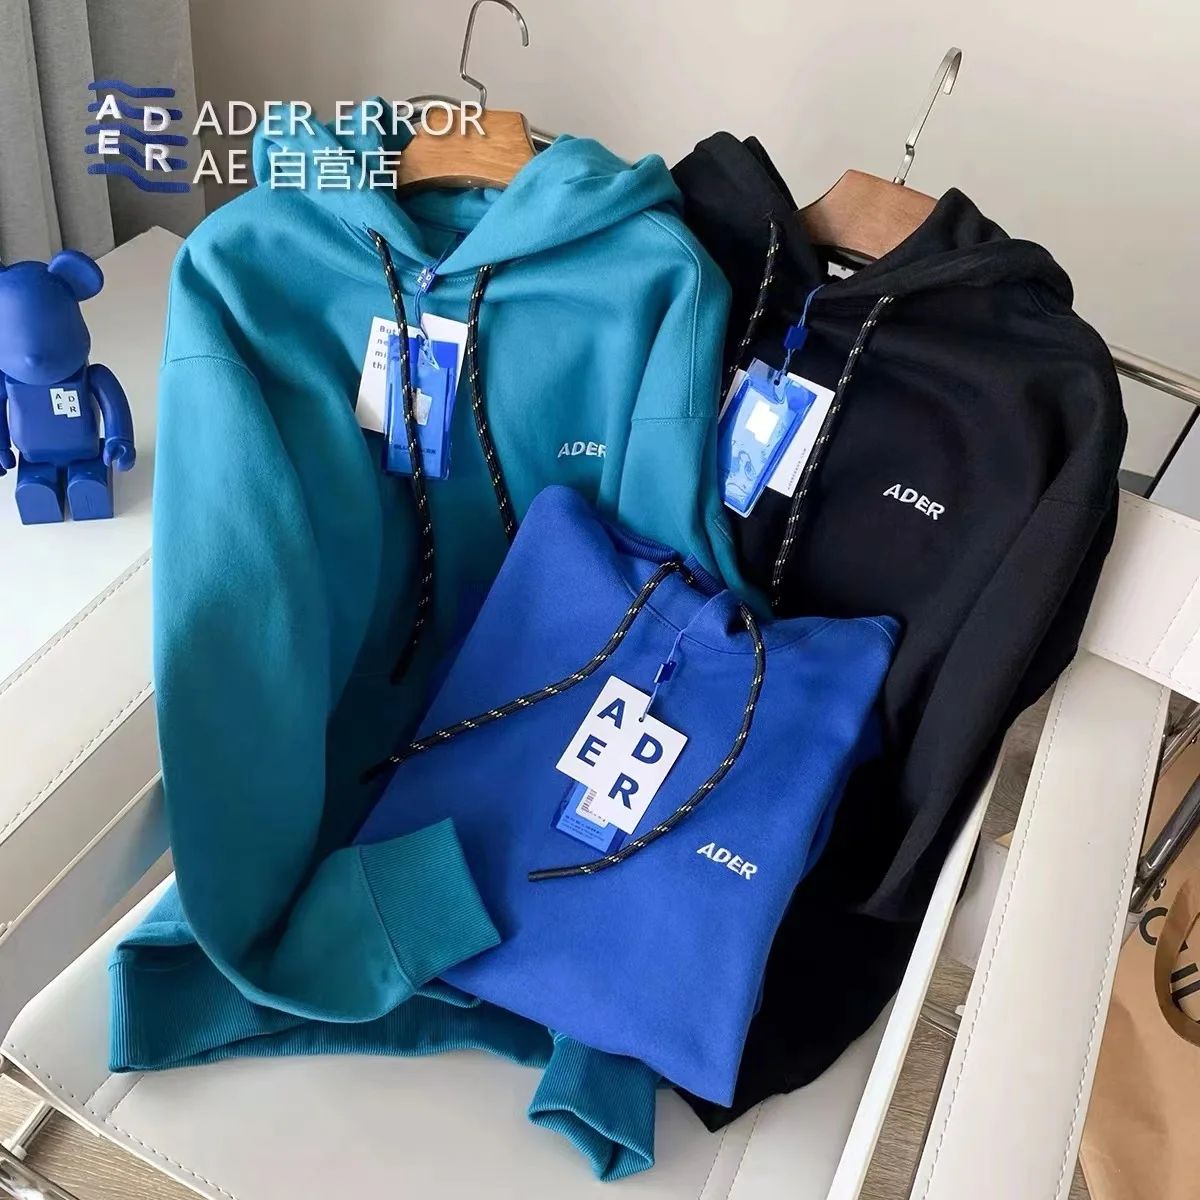 quality high ADER ERROR simple loose casual oversized couple hooded sweater unisex Klein blue three-color top for men and women